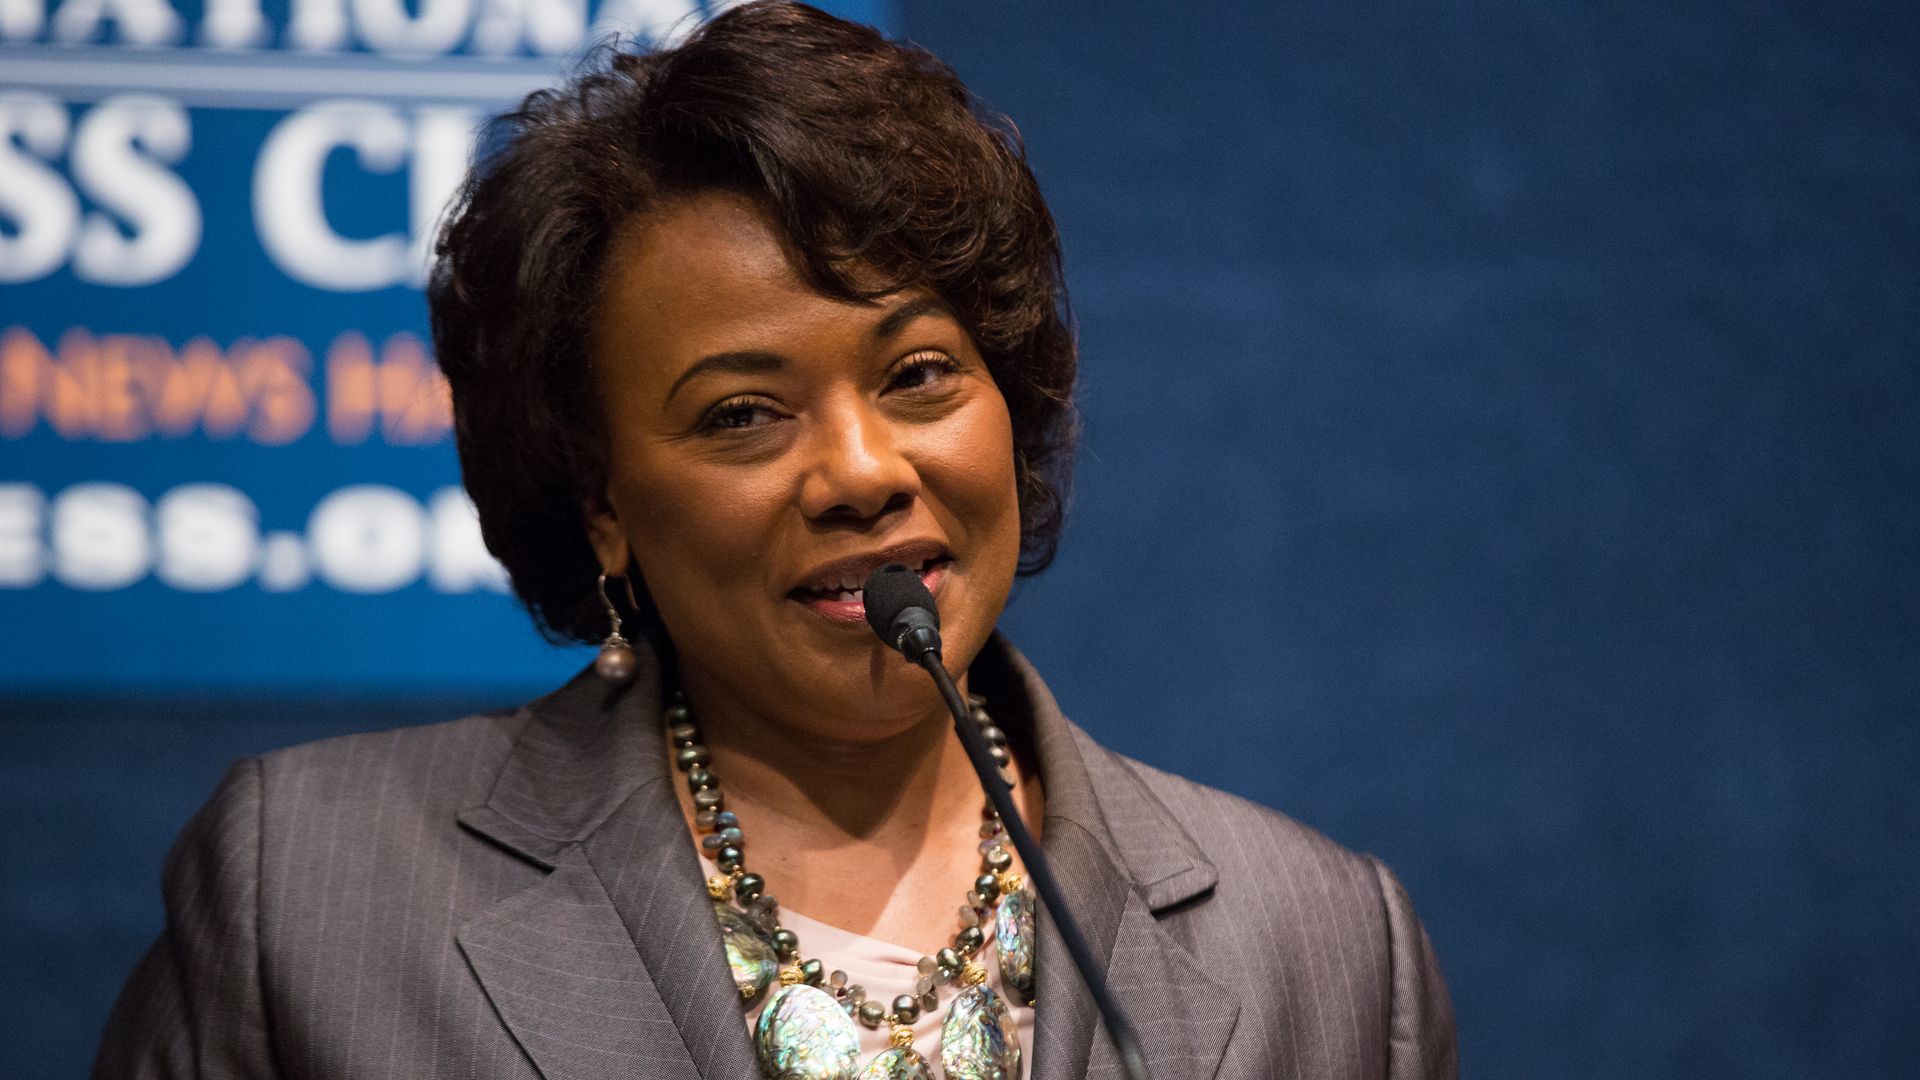 Rev. Bernice King gives a speech at the National Press Club